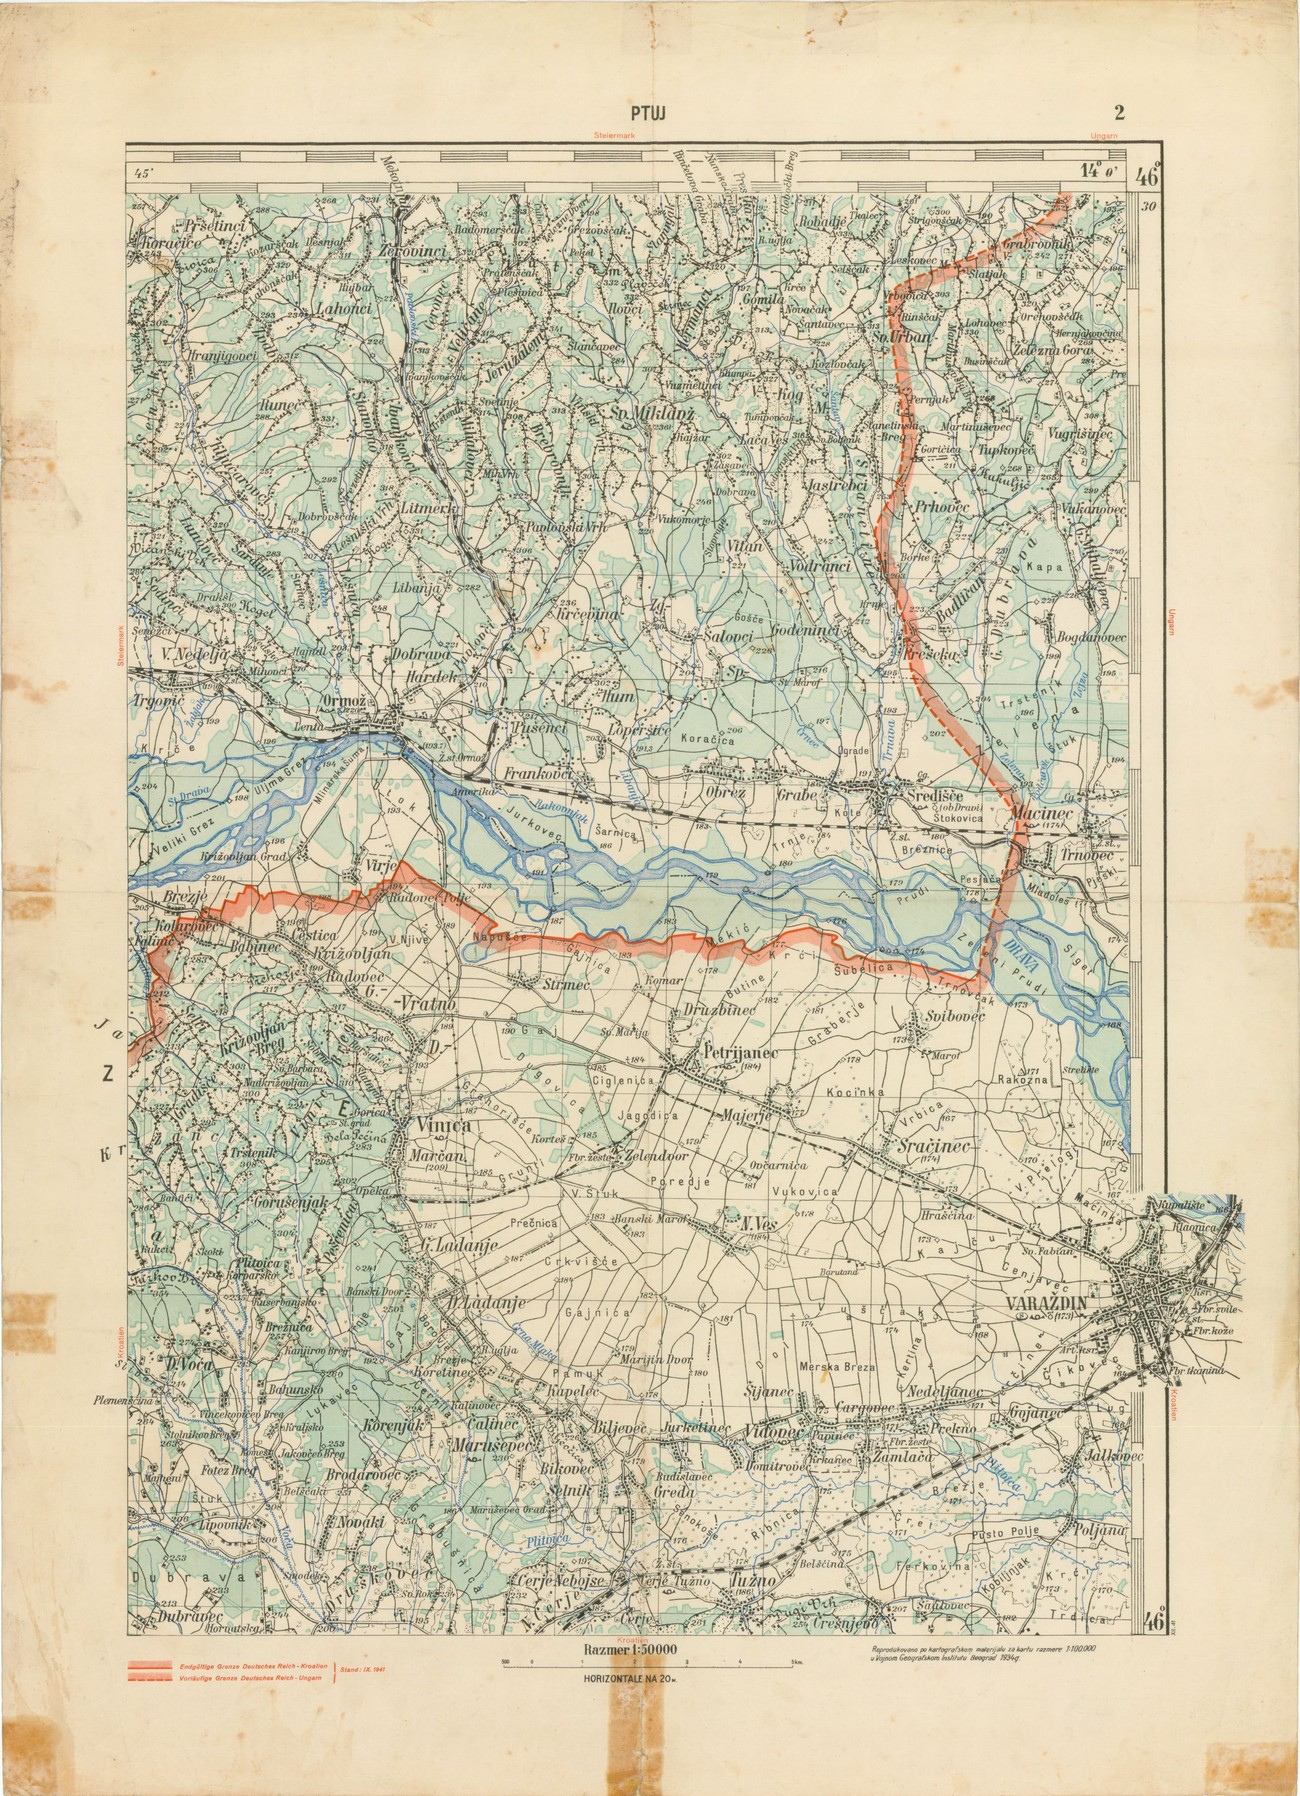 A section of a map showing the border between Germany and the Independent State of Croatia at Ormož. The map clearly shows the course of the borderline. Source: Jugoslavija, topografske karte razmera 1:50,000, sheet Ptuj. Archive: Anton Melik Geographical Institute ZRC SAZU.